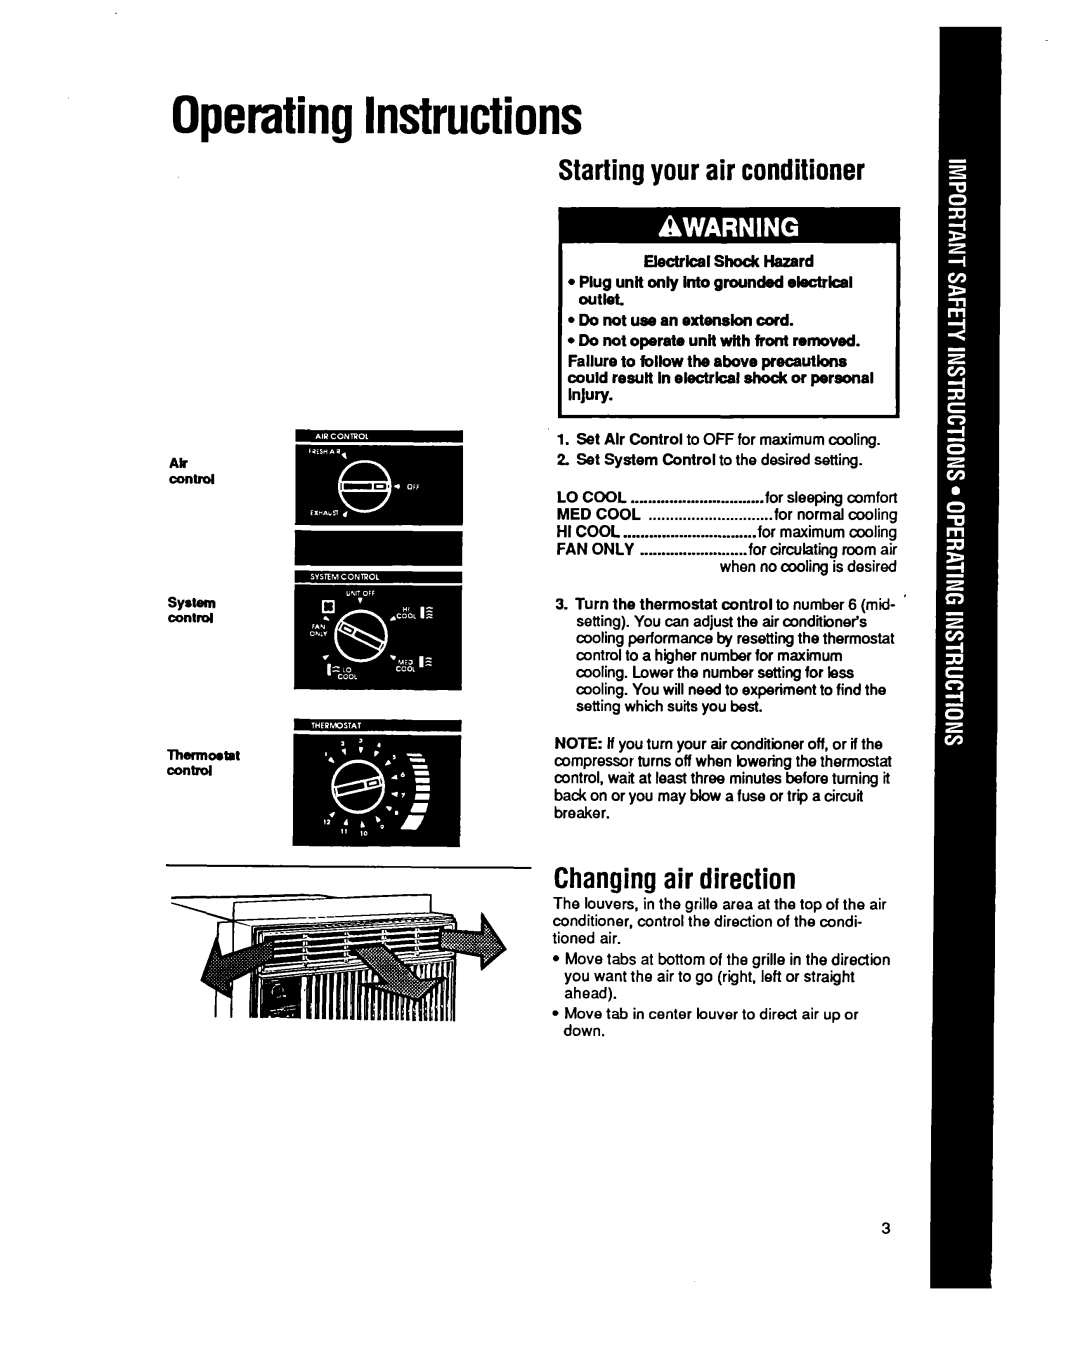 Whirlpool BHAC1400XS0 manual OperatingInstructions, Startingyour air conditioner, Changingair direction 